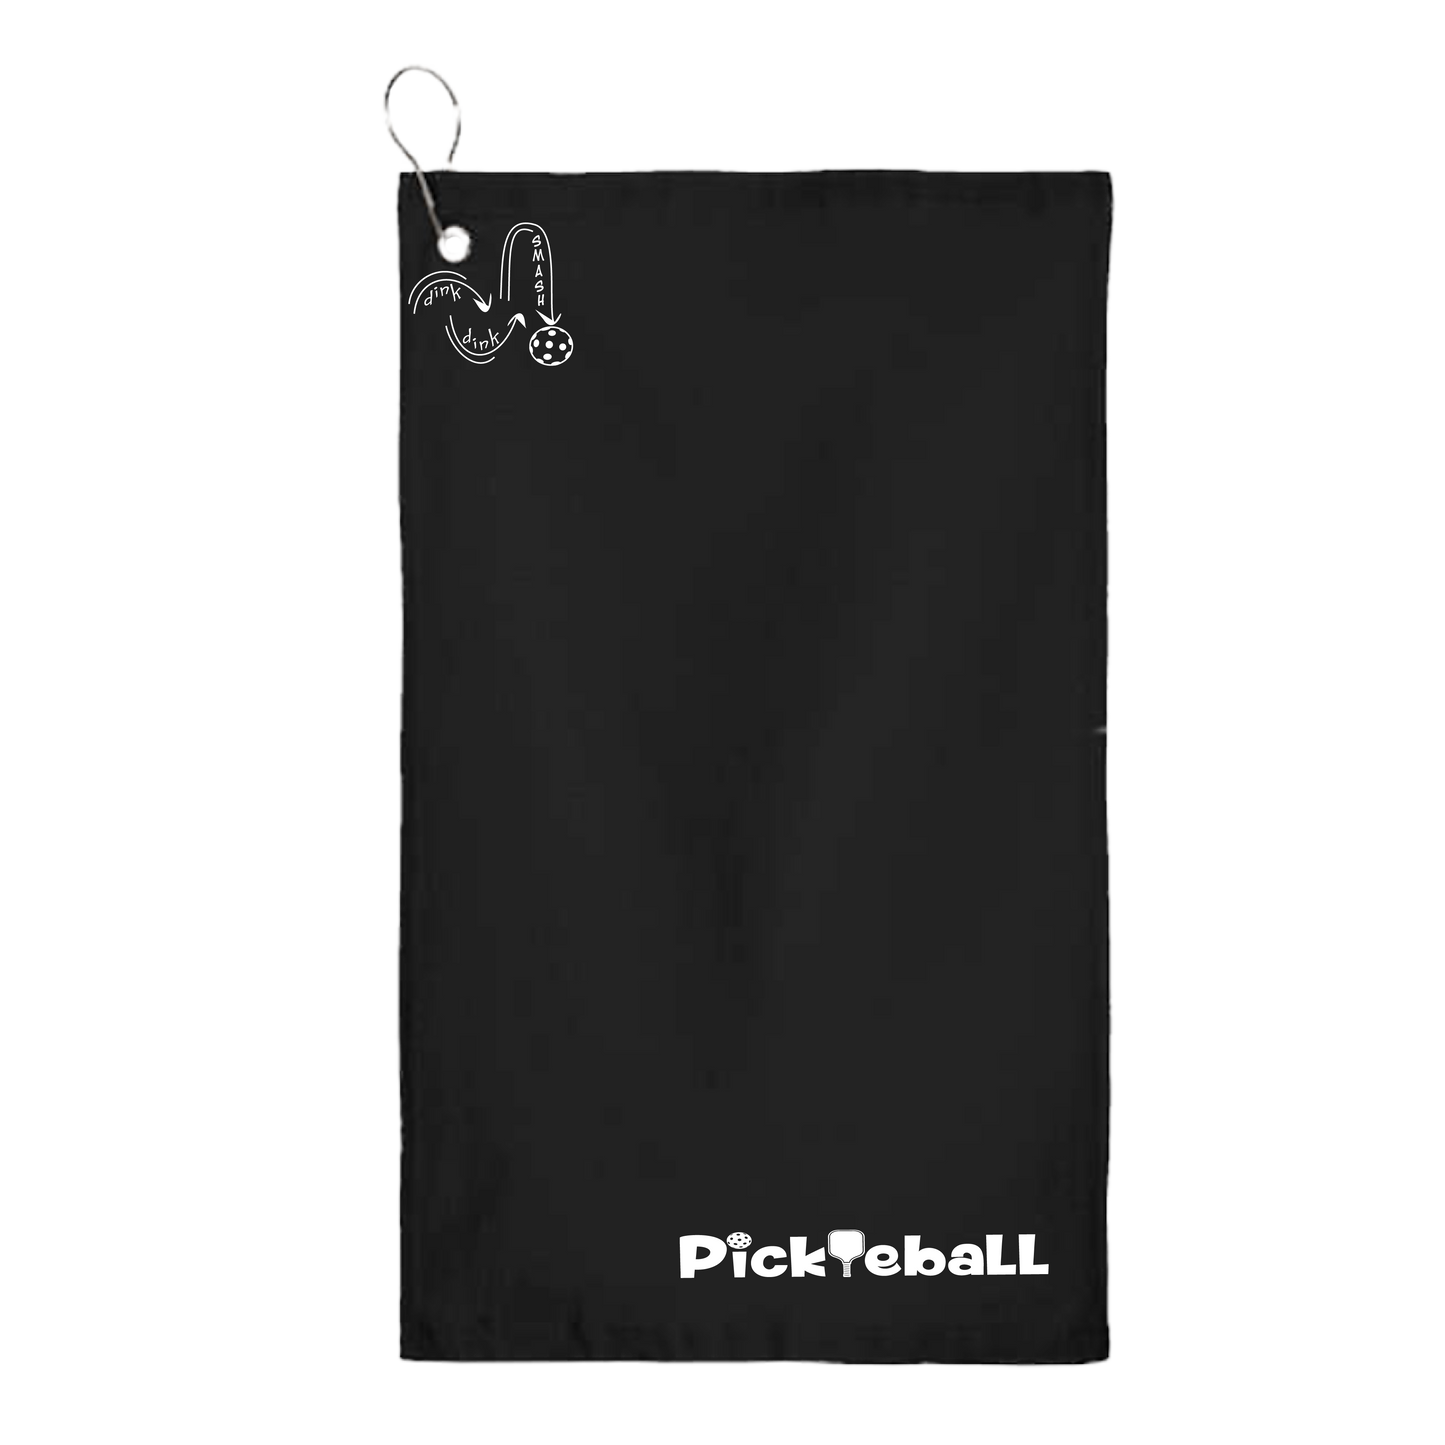 Clever Pickleball | Pickleball Court Towels | Grommeted 100% Cotton Terry Velour